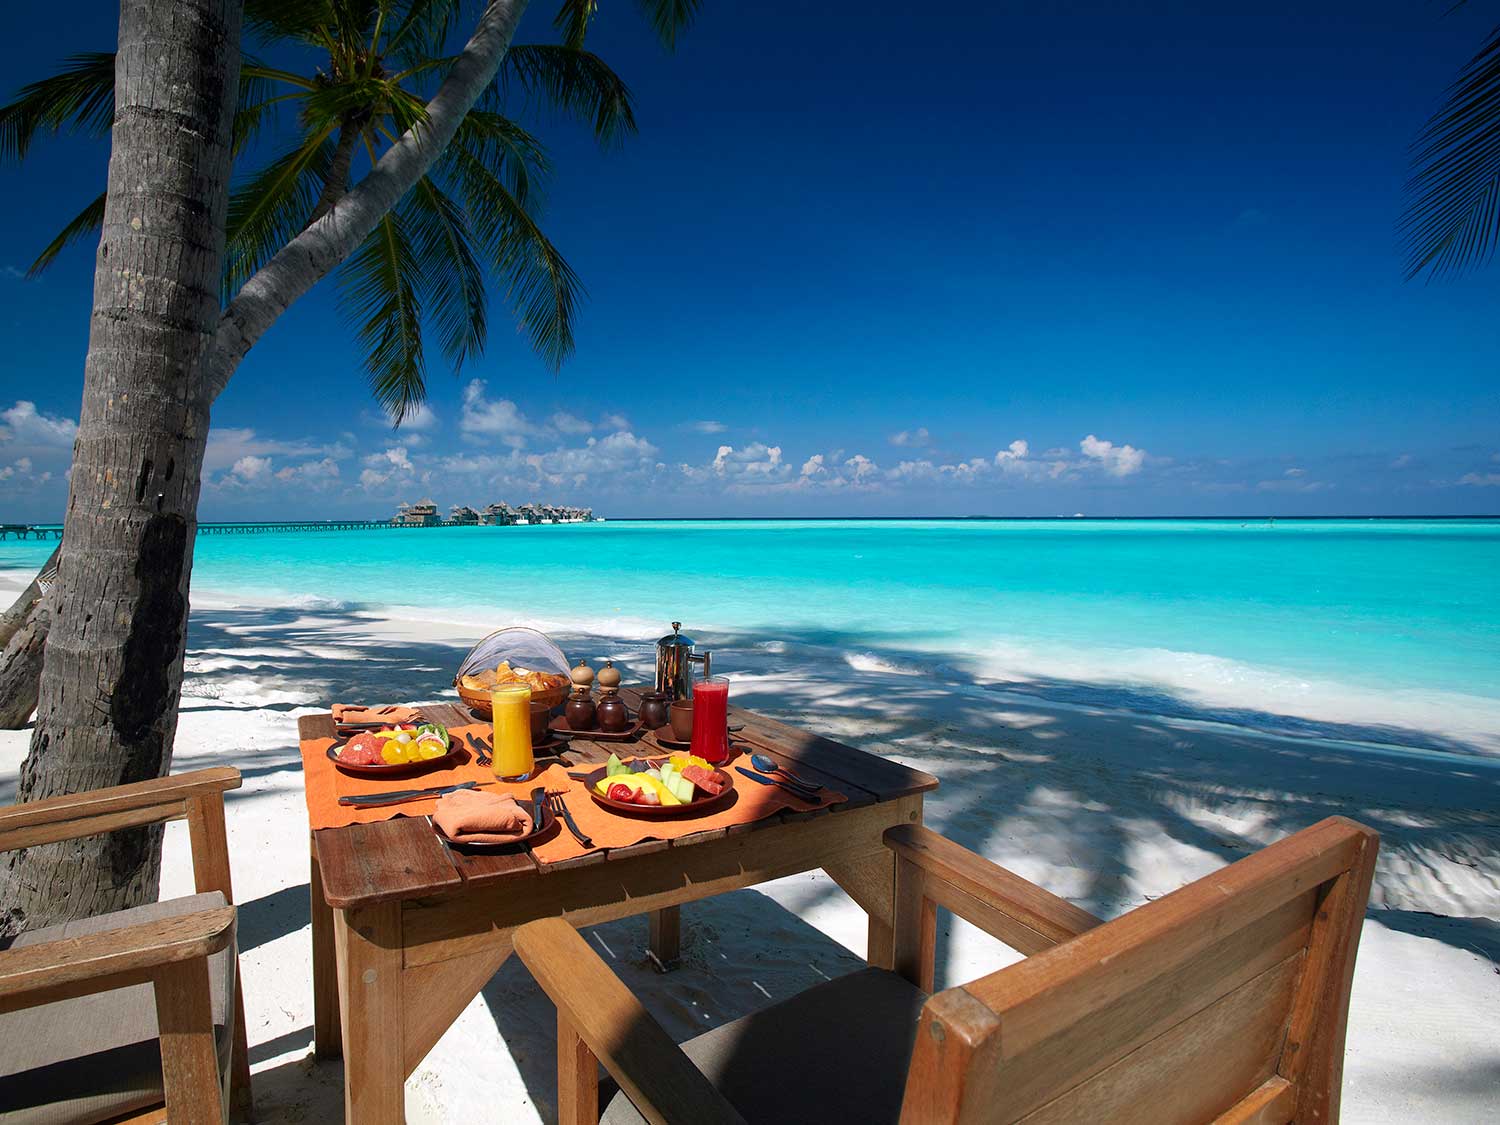 A small dining area on the beach of an island resort.